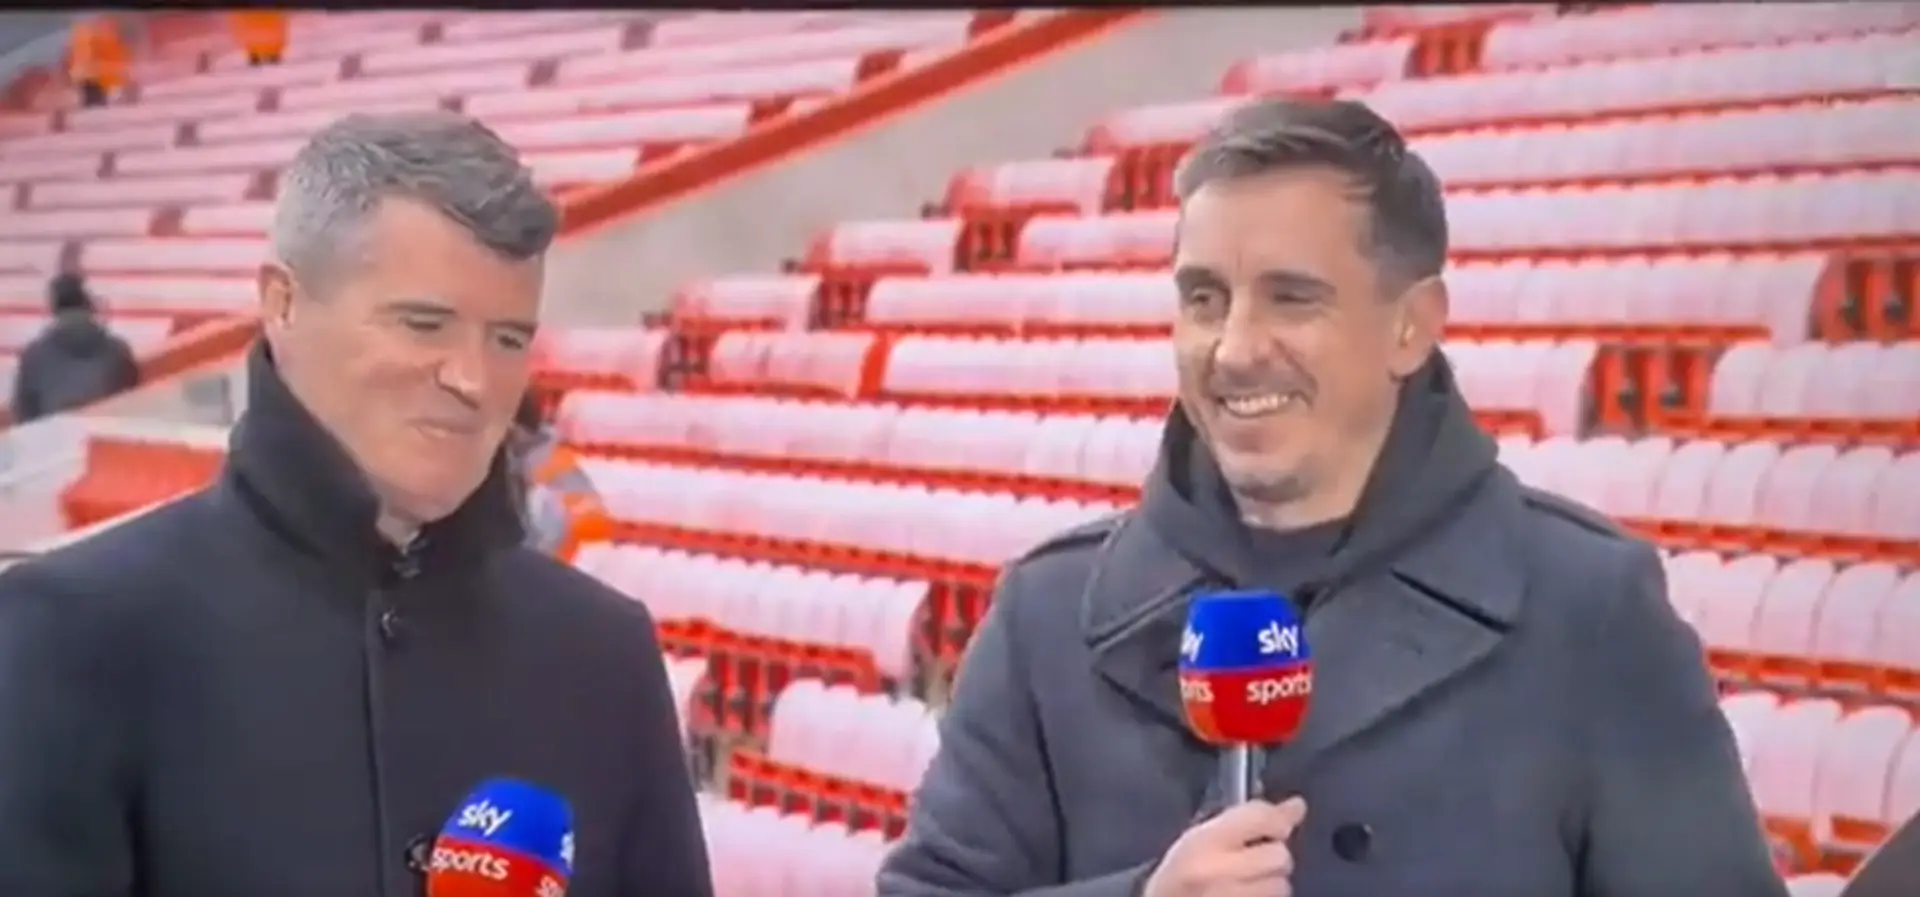 Keane and Neville laugh at Souness as he predicts confident Liverpool win over United - spotted